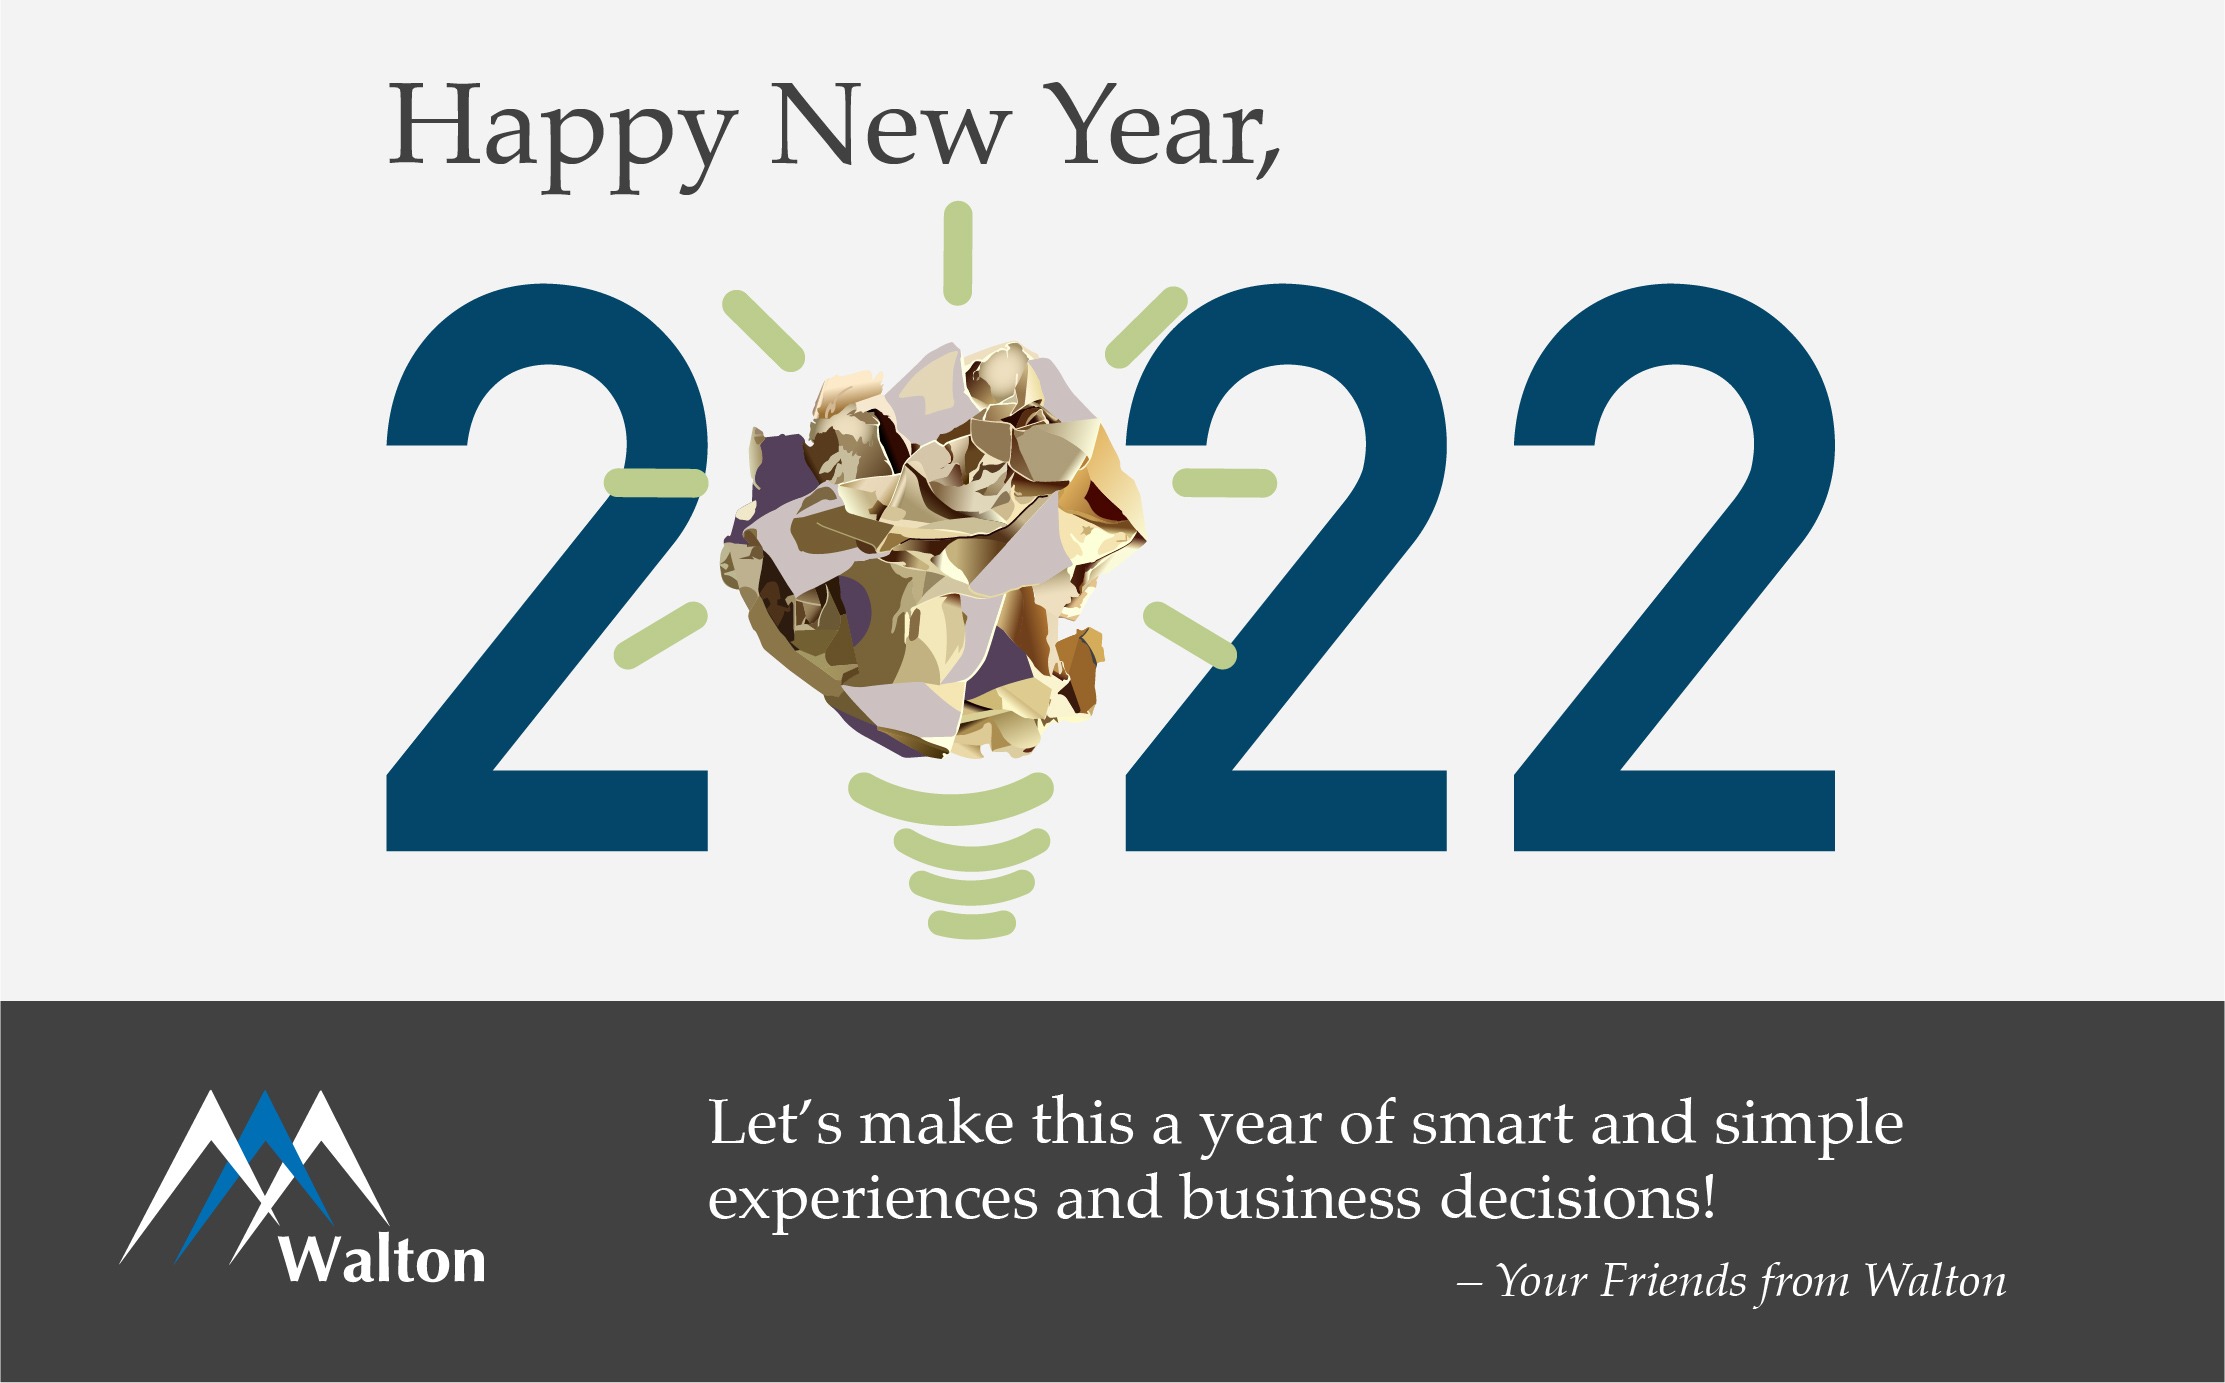 Happy New Year with lightbulb for the 0 in 2022